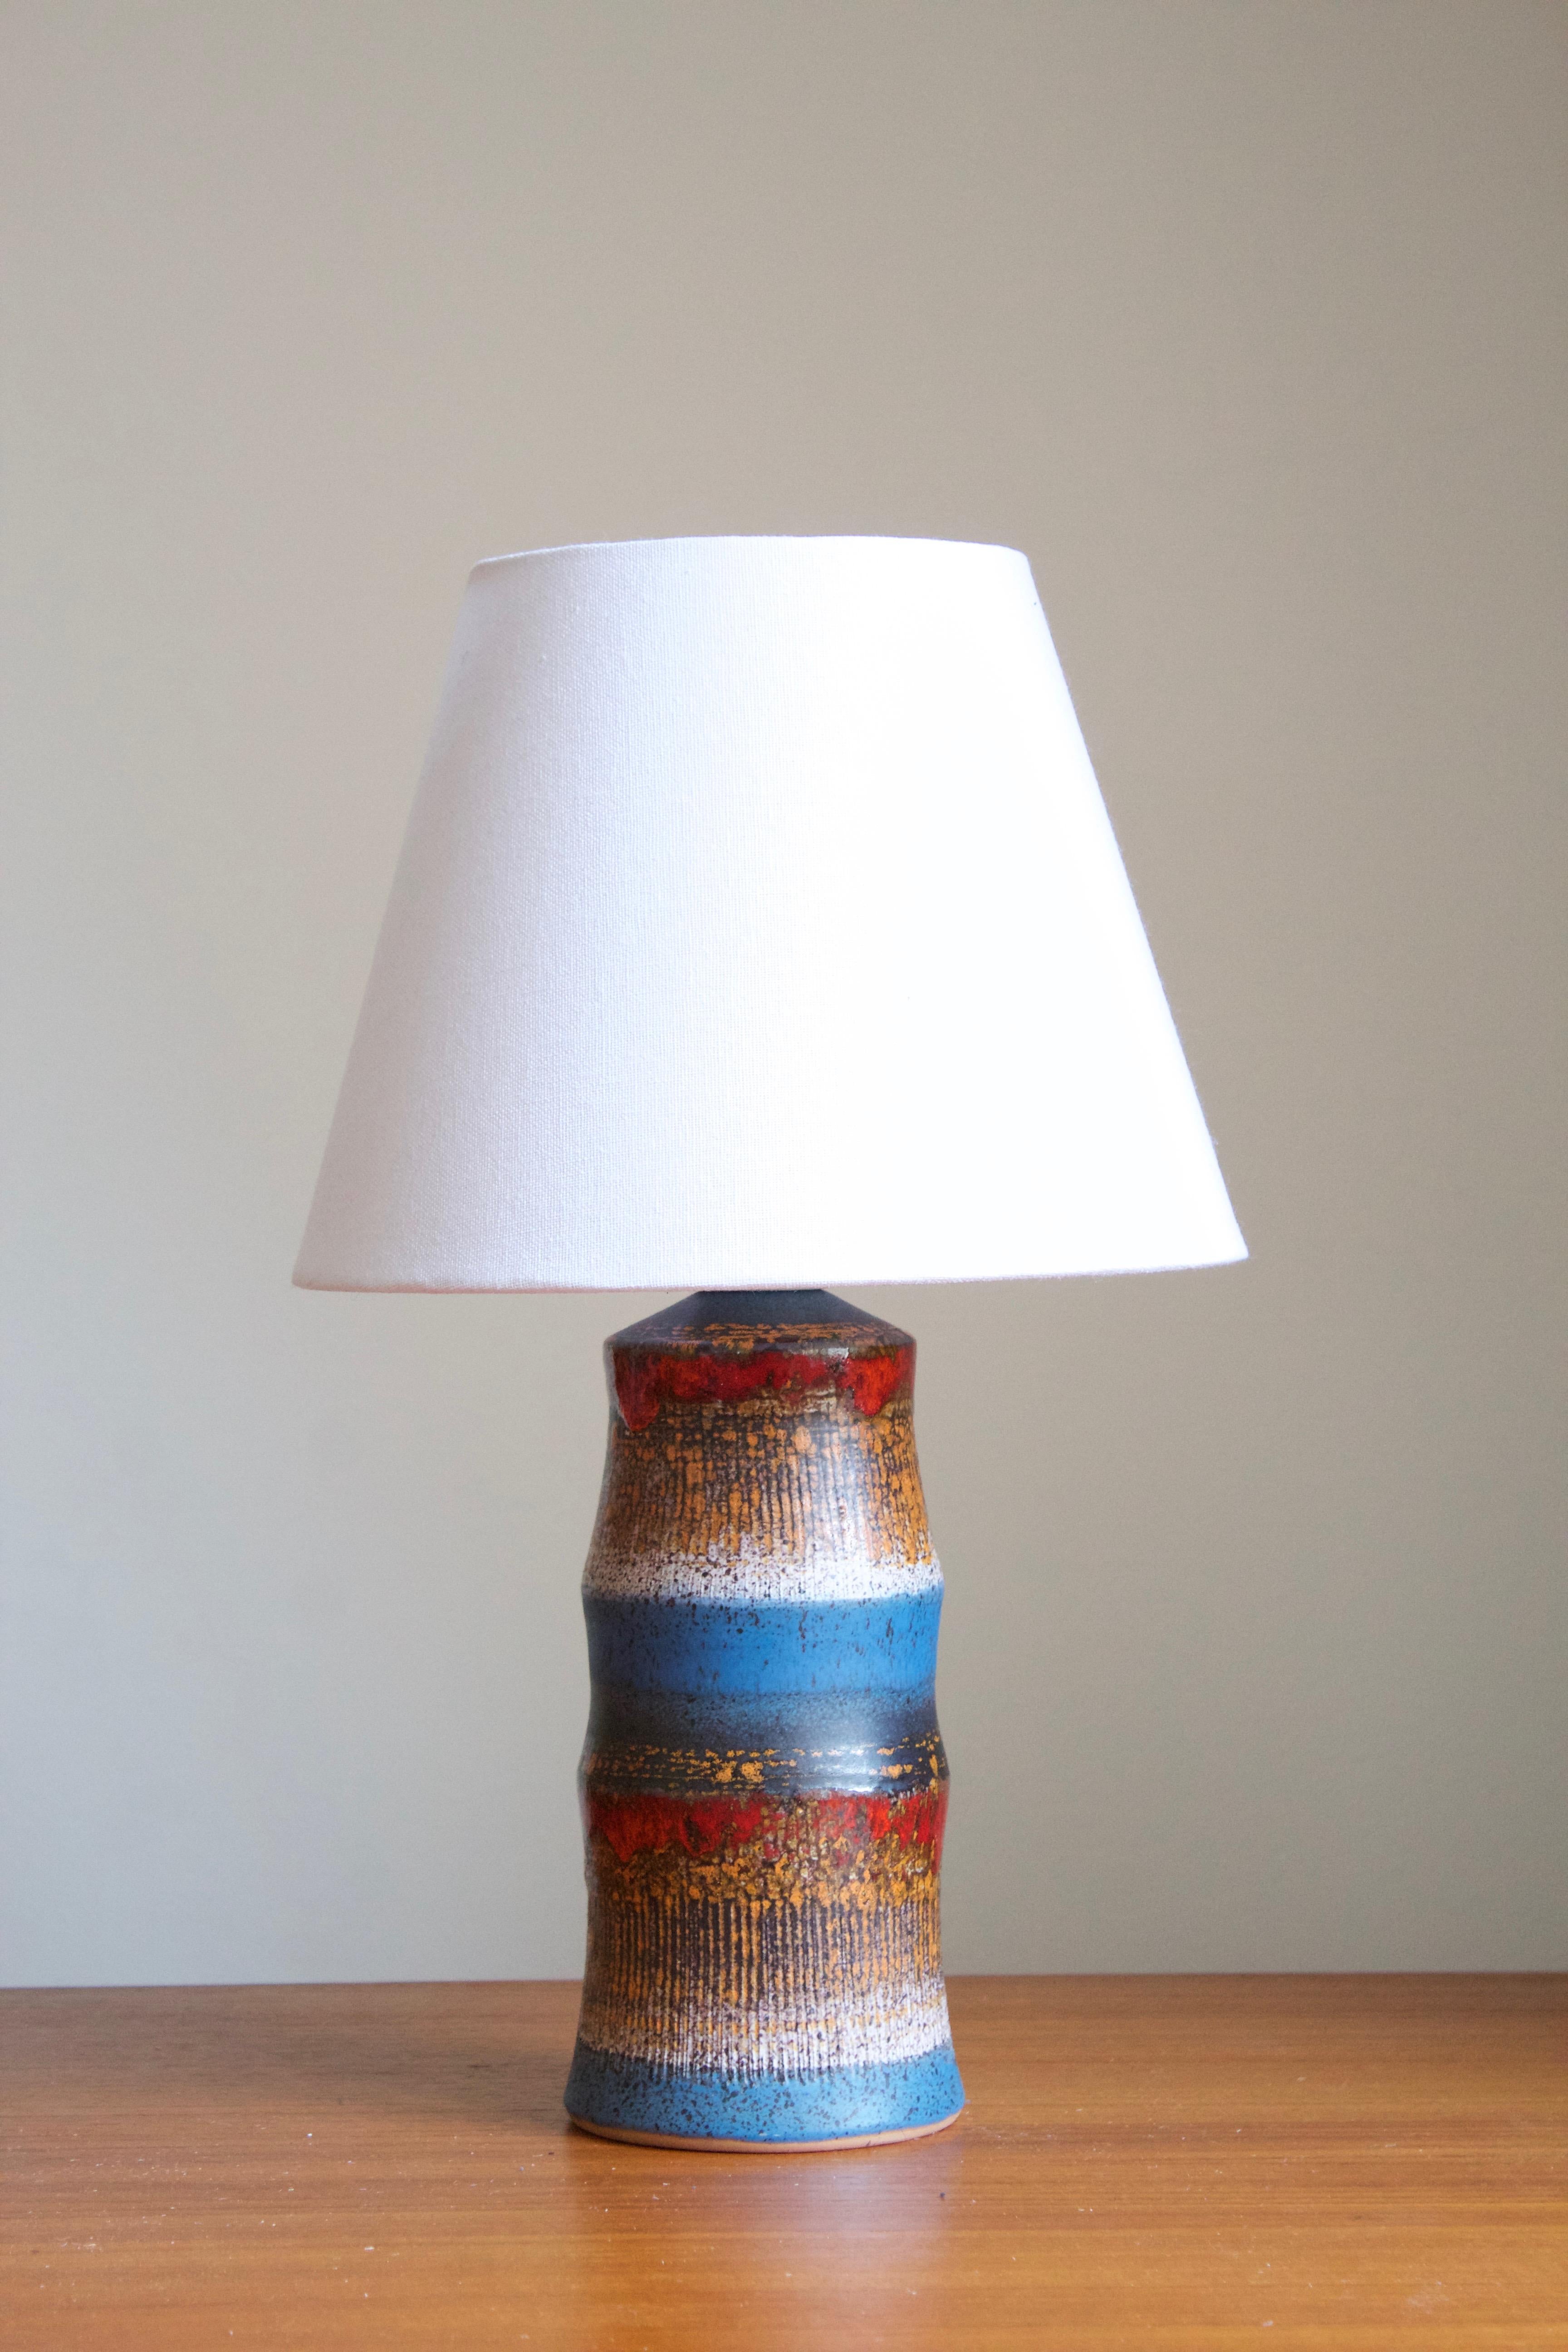 A glazed stoneware table lamp. By Tilgmans Keramik, 1950s. Stamped. Sold without lampshade.

Glaze features brown-blue-red-white-orange colors.

Other designers of the period include Gunnar Nylund, Axel Salto, Arne Bang, and Carl-Harry Stålhane.